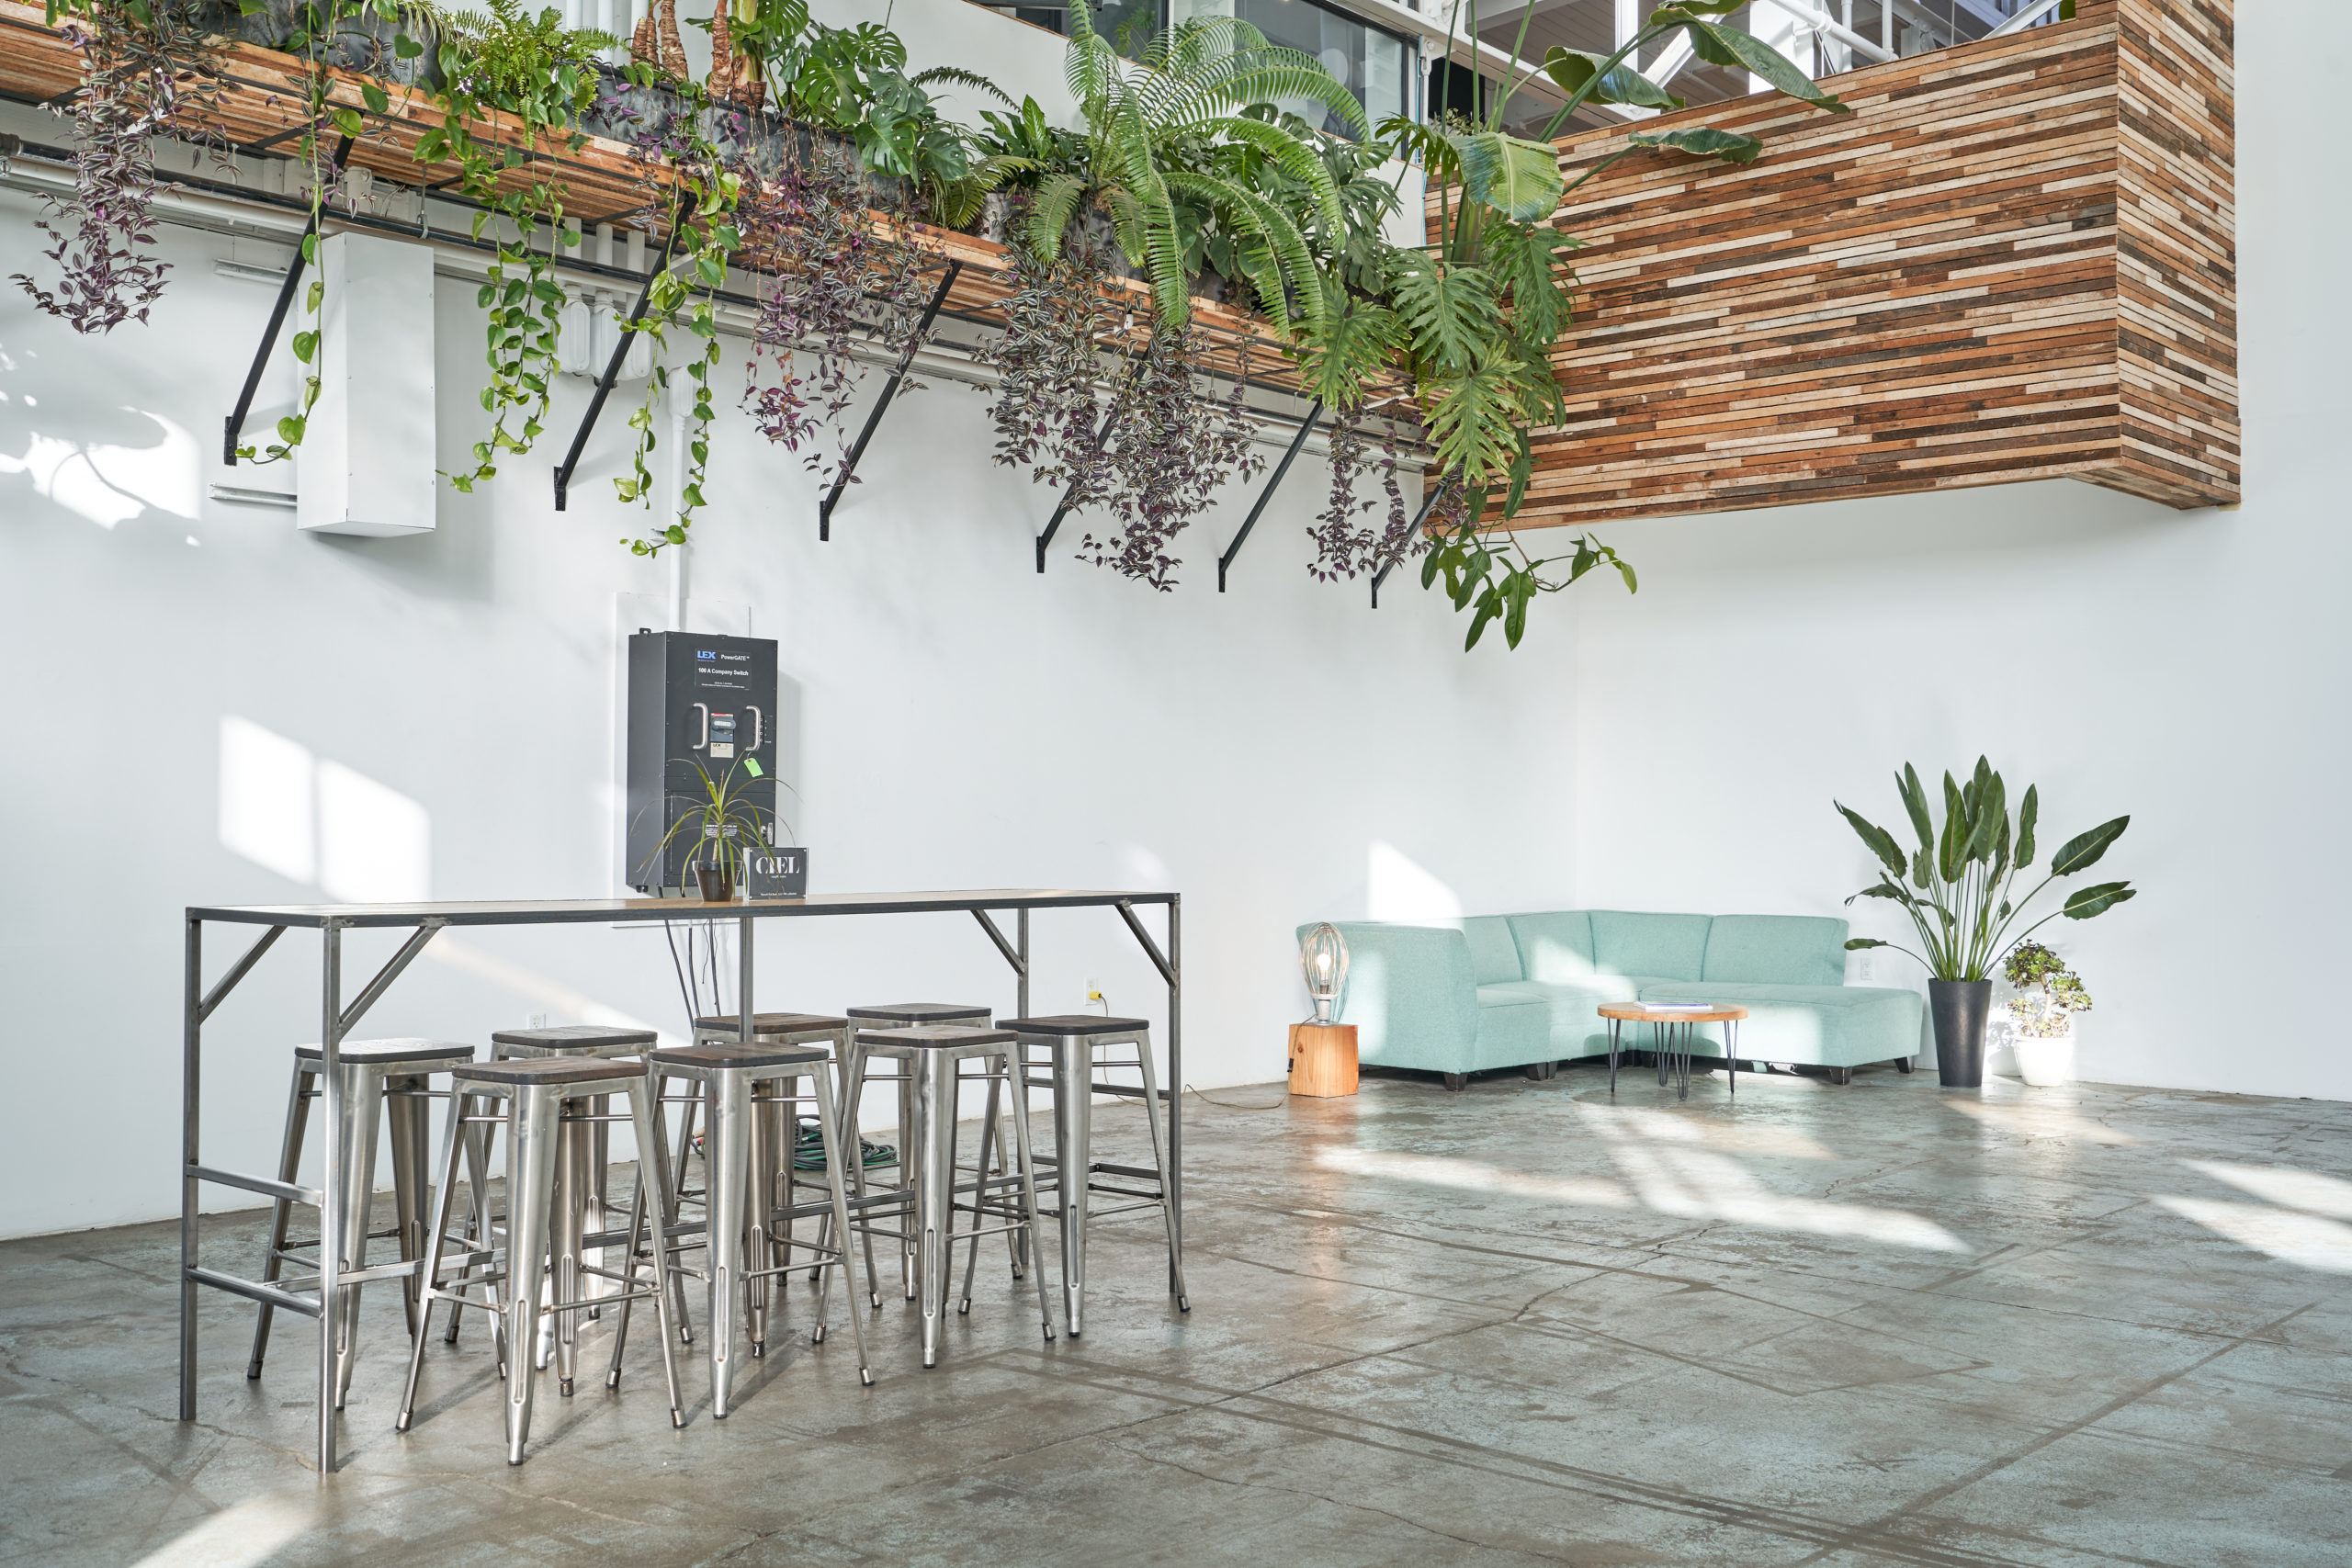 A close up view of tall backless chairs around an industrial table on the left. A black power box sits behind it on the white wall and a teal couch with a coffee table is to the right. Studio 4 also has green plants hanging from the ceiling in this multimedia studio space.